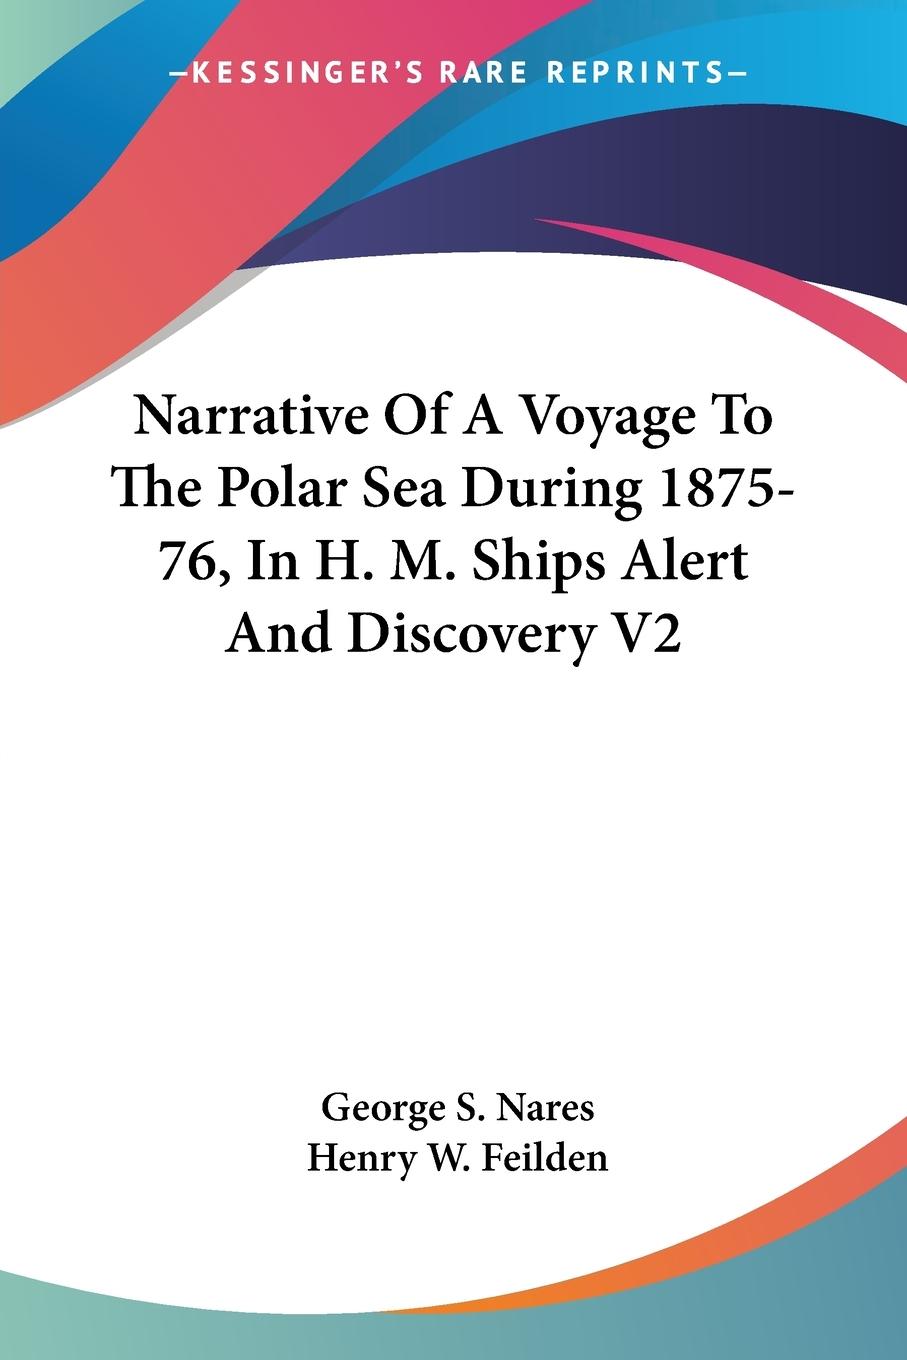 Narrative Of A Voyage To The Polar Sea During 1875-76, In H. M. Ships Alert And Discovery V2 - Nares, George S.